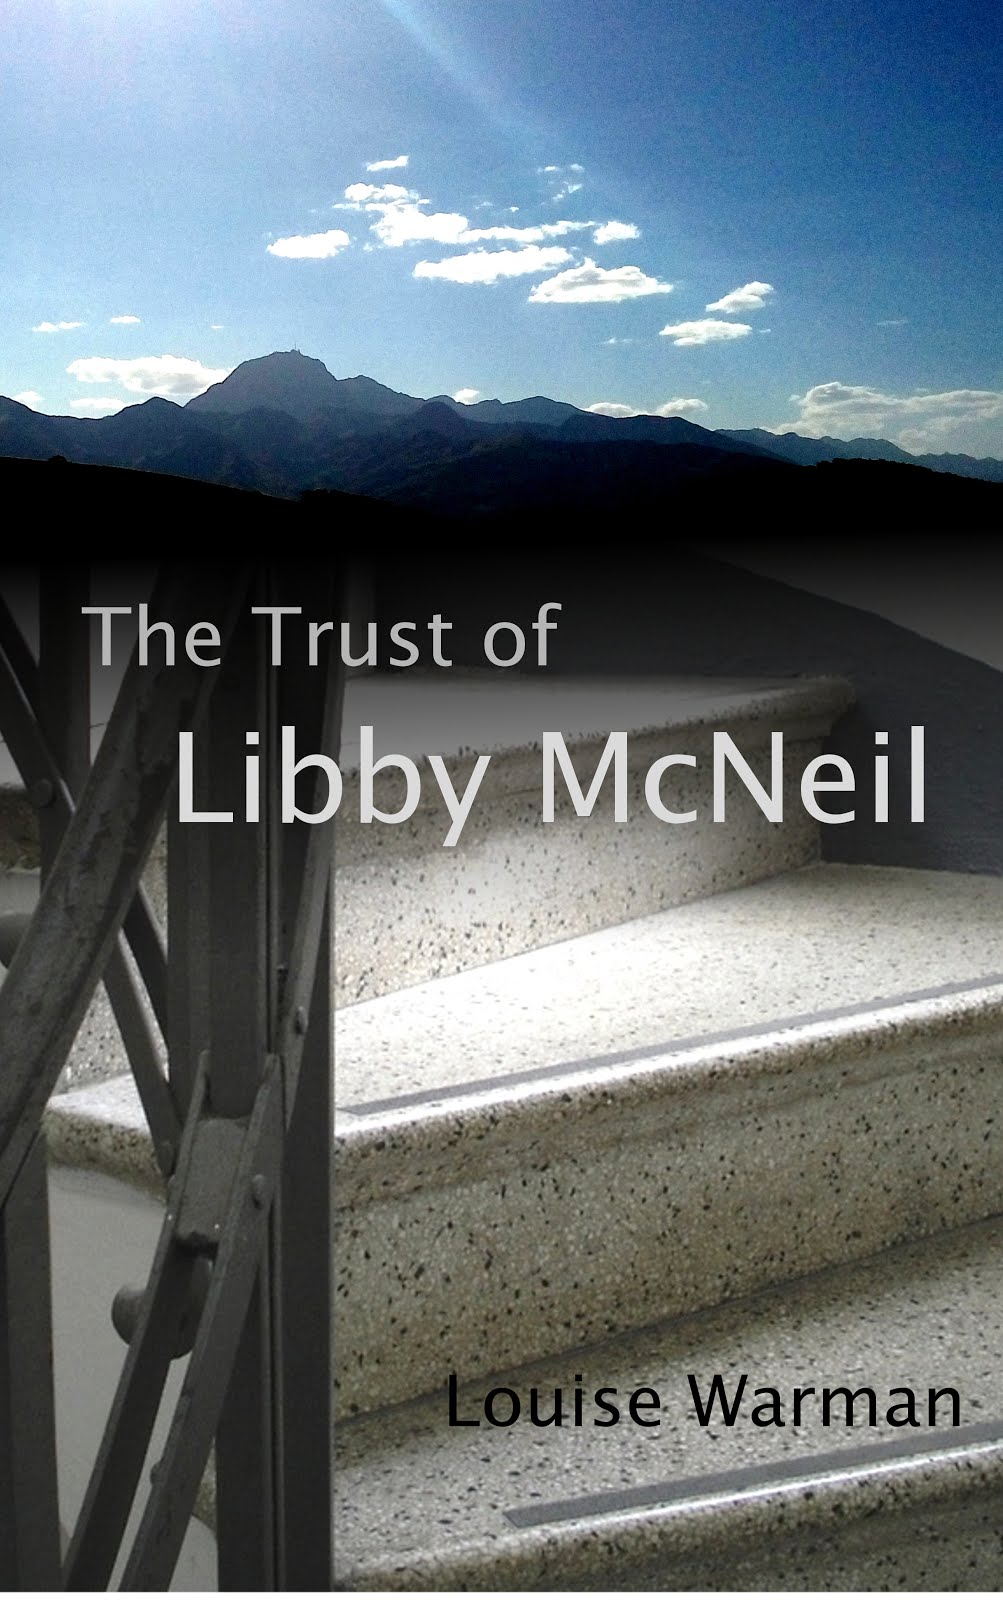 The Trust of Libby McNeil